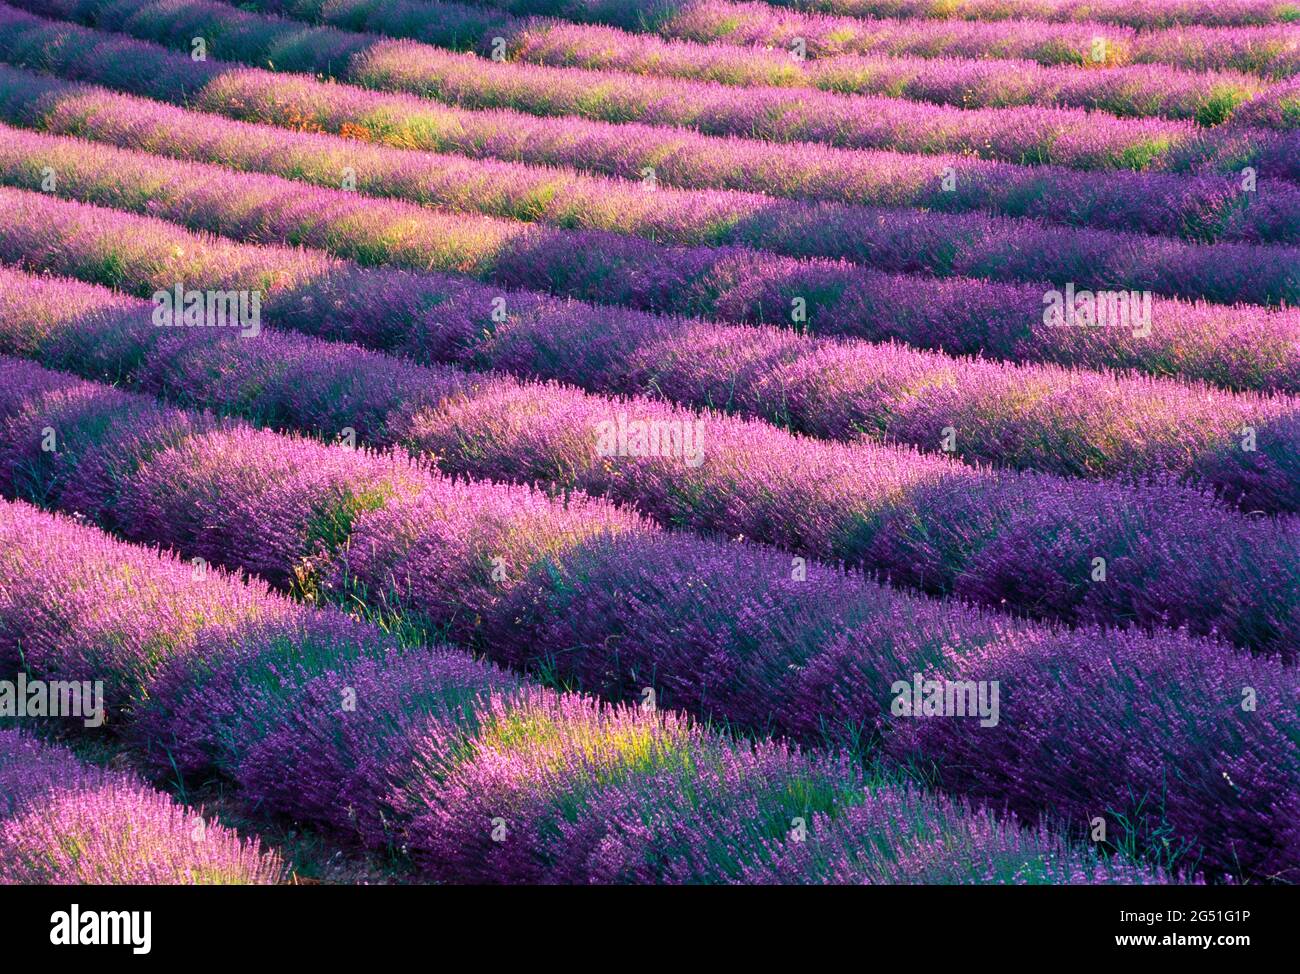 View of lavender field, Provence, France Stock Photo